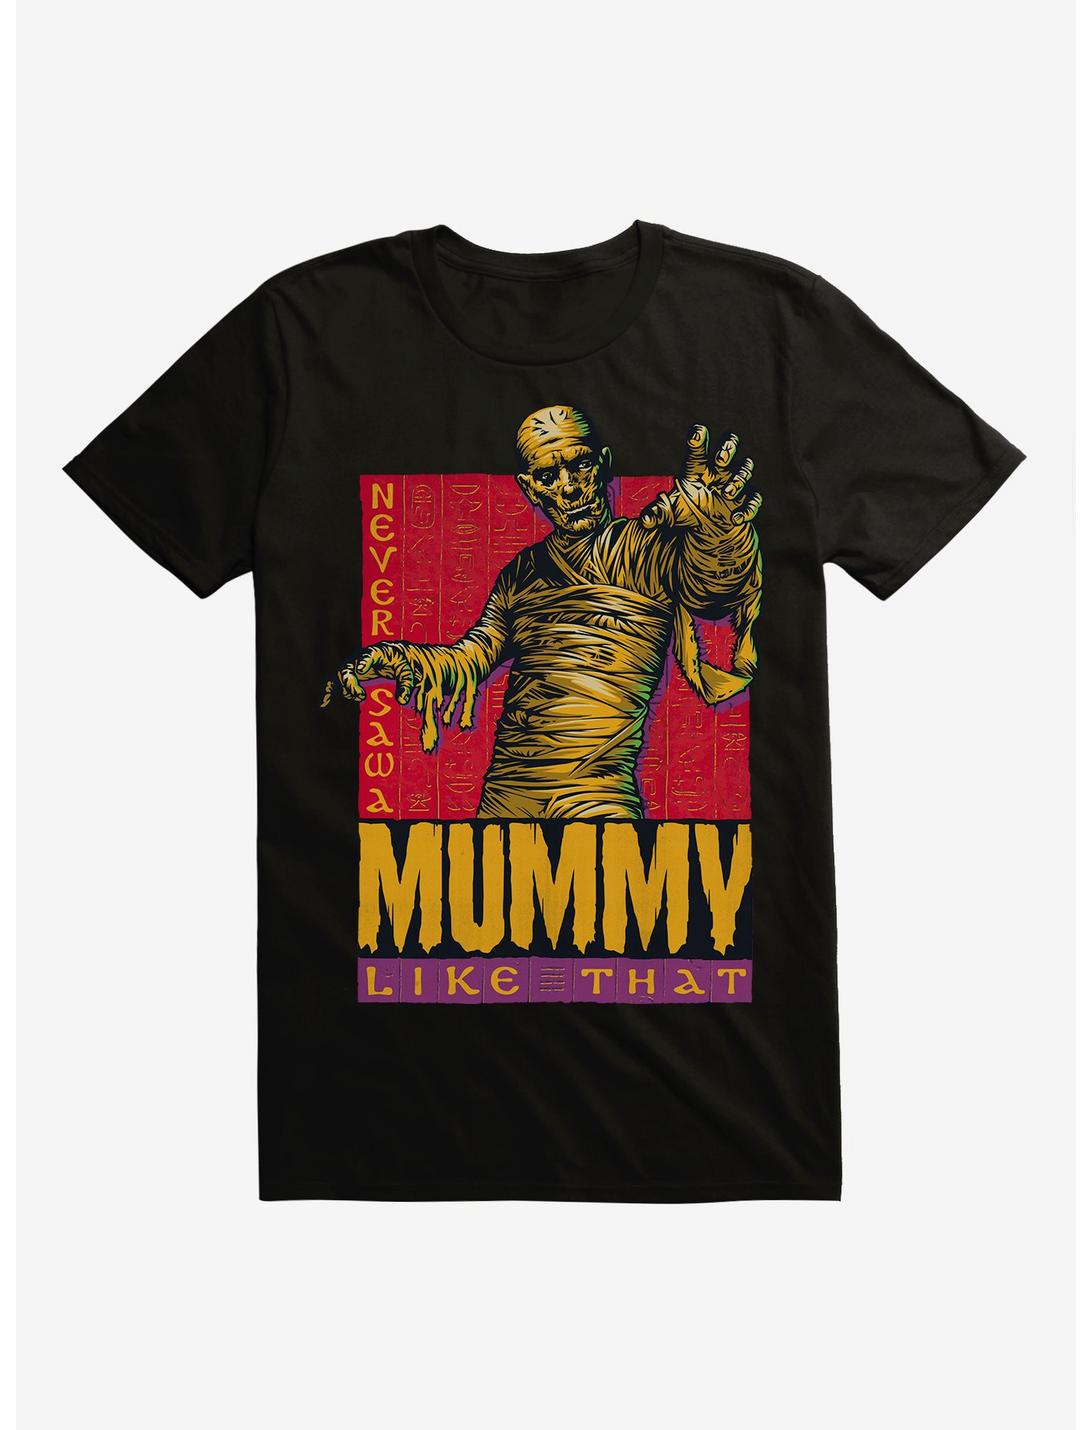 Universal Monsters Never Saw A Mummy Like That T-Shirt, , hi-res